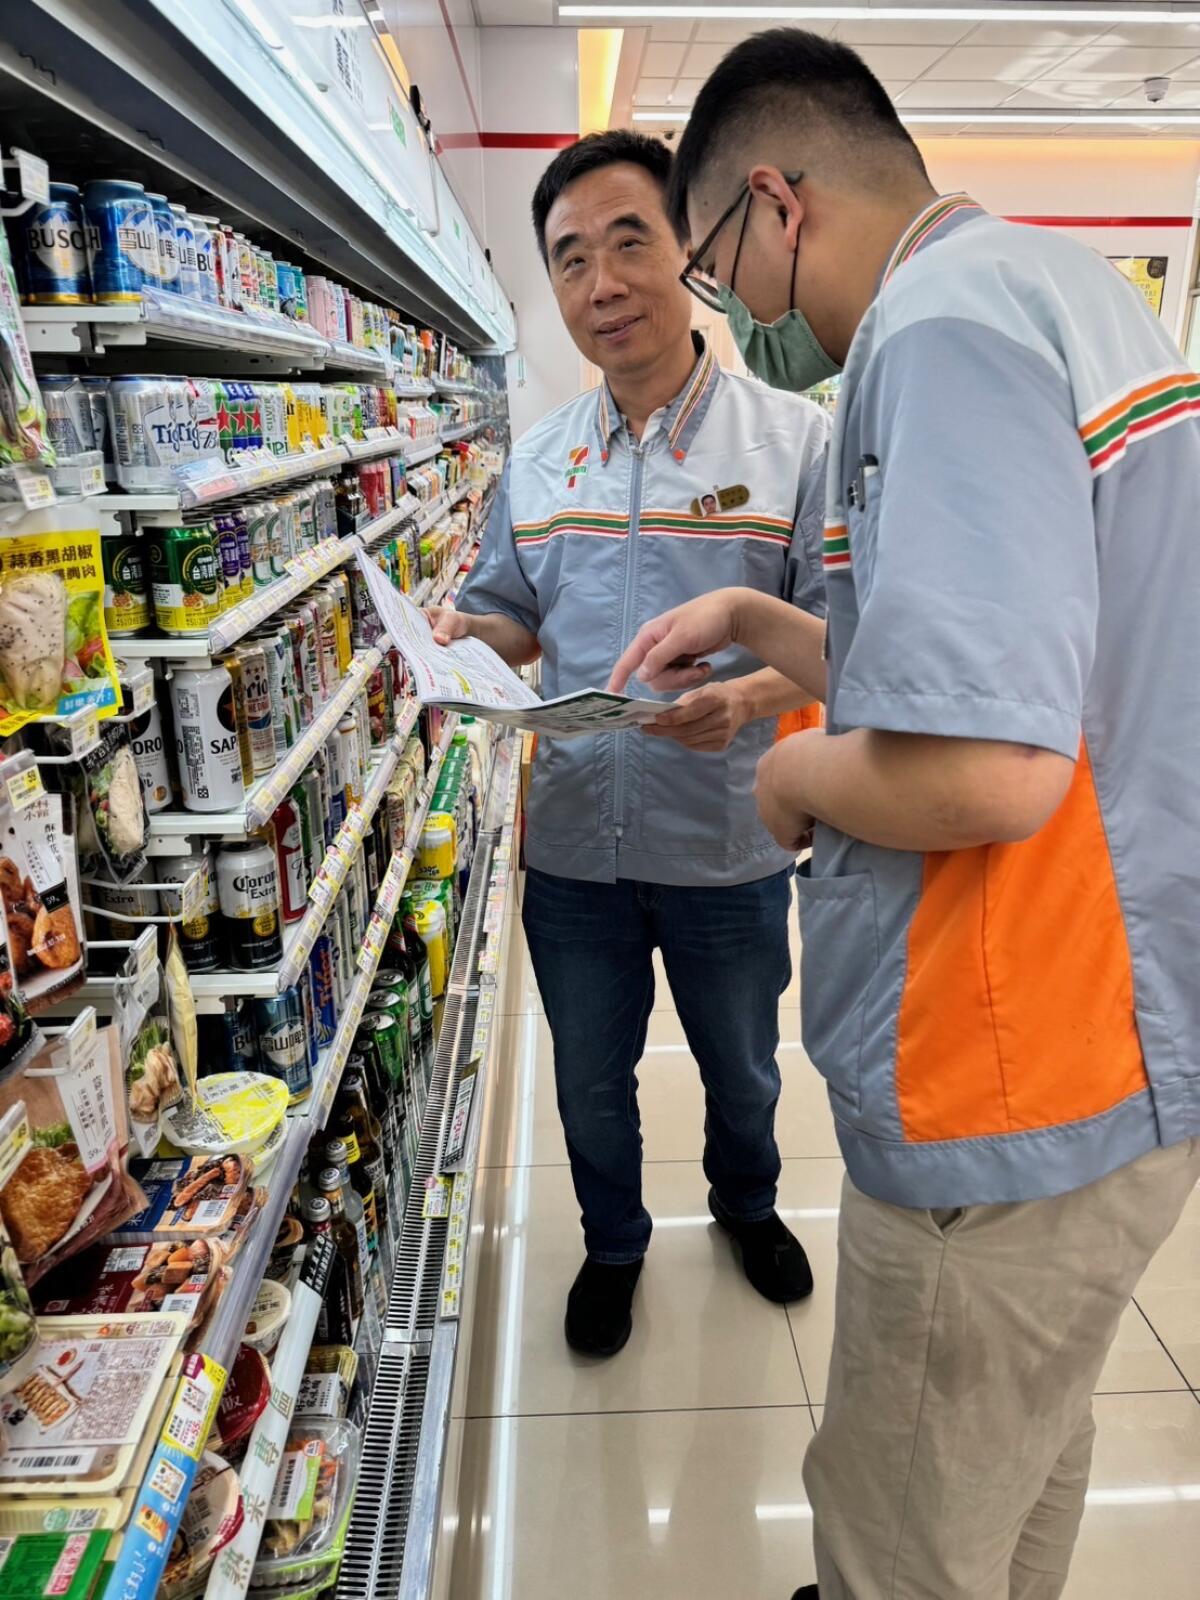 The author's uncle at work at 7-Eleven in Taichung, Taiwan.